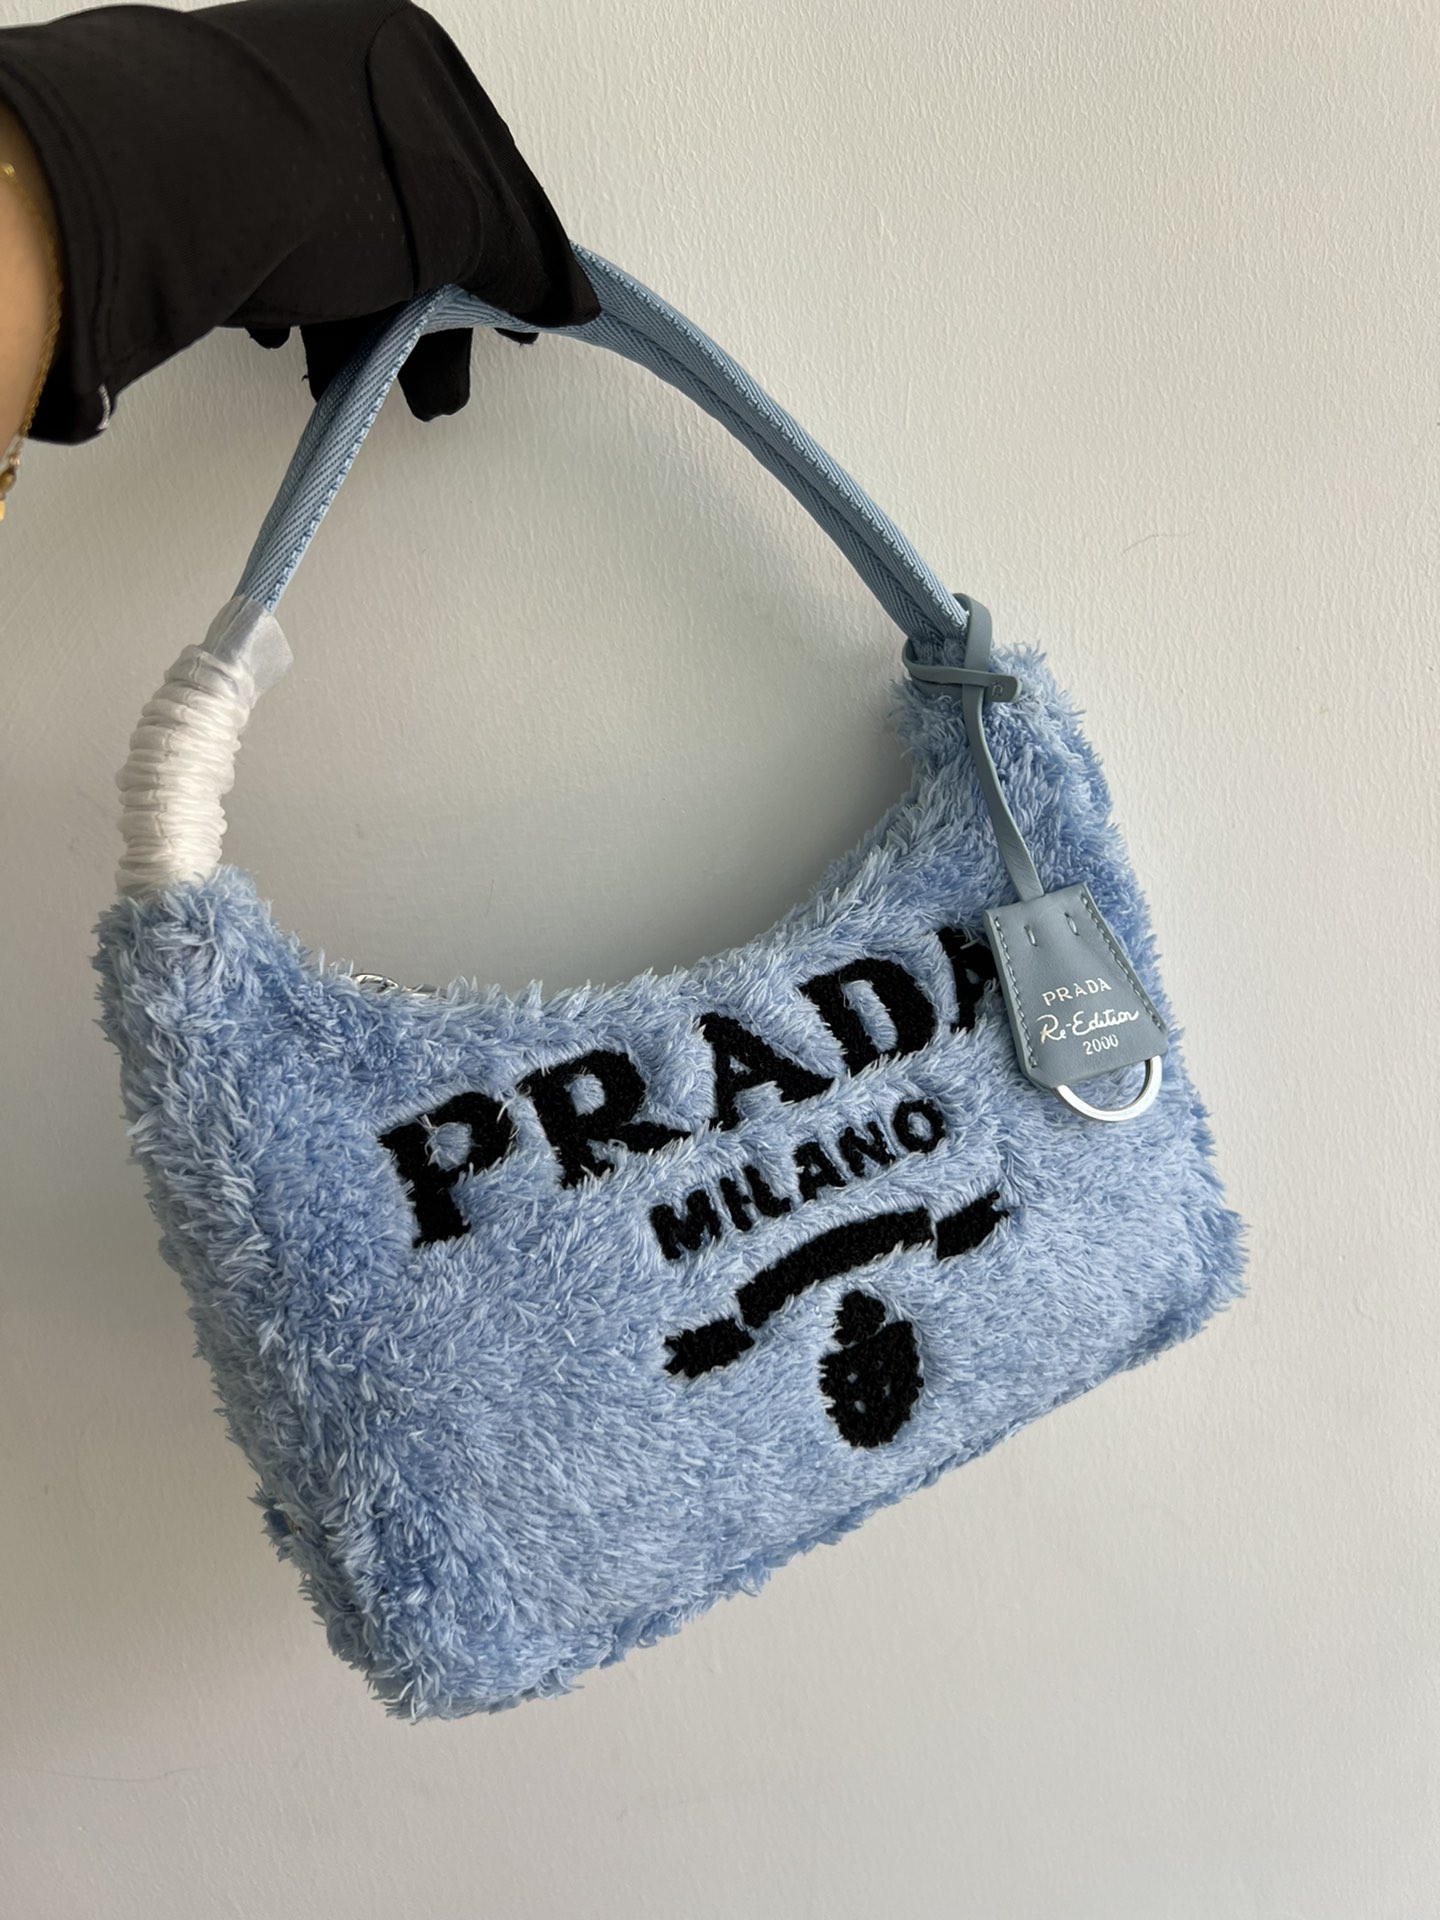 Prada Re-Edition 2000 Store
 Bags Handbags Customize Best Quality Replica
 Embroidery Fabric Summer Collection Mini